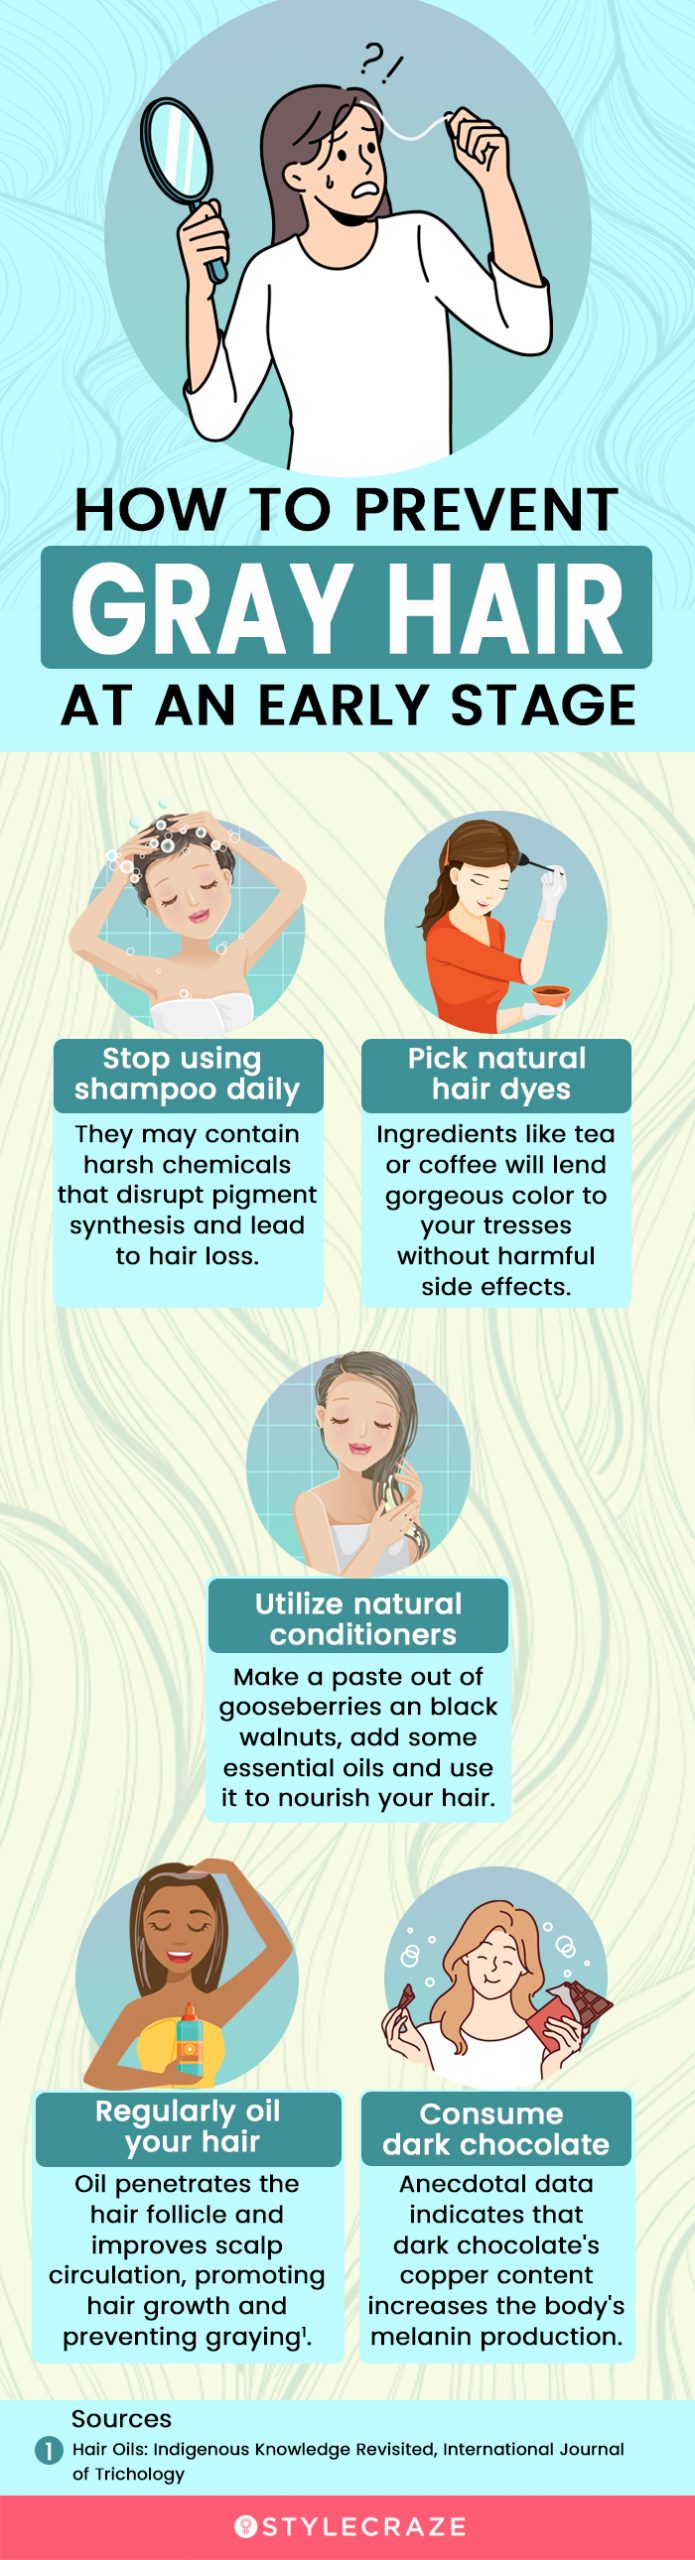 how to prevent gray hair at an early stage (infographic)